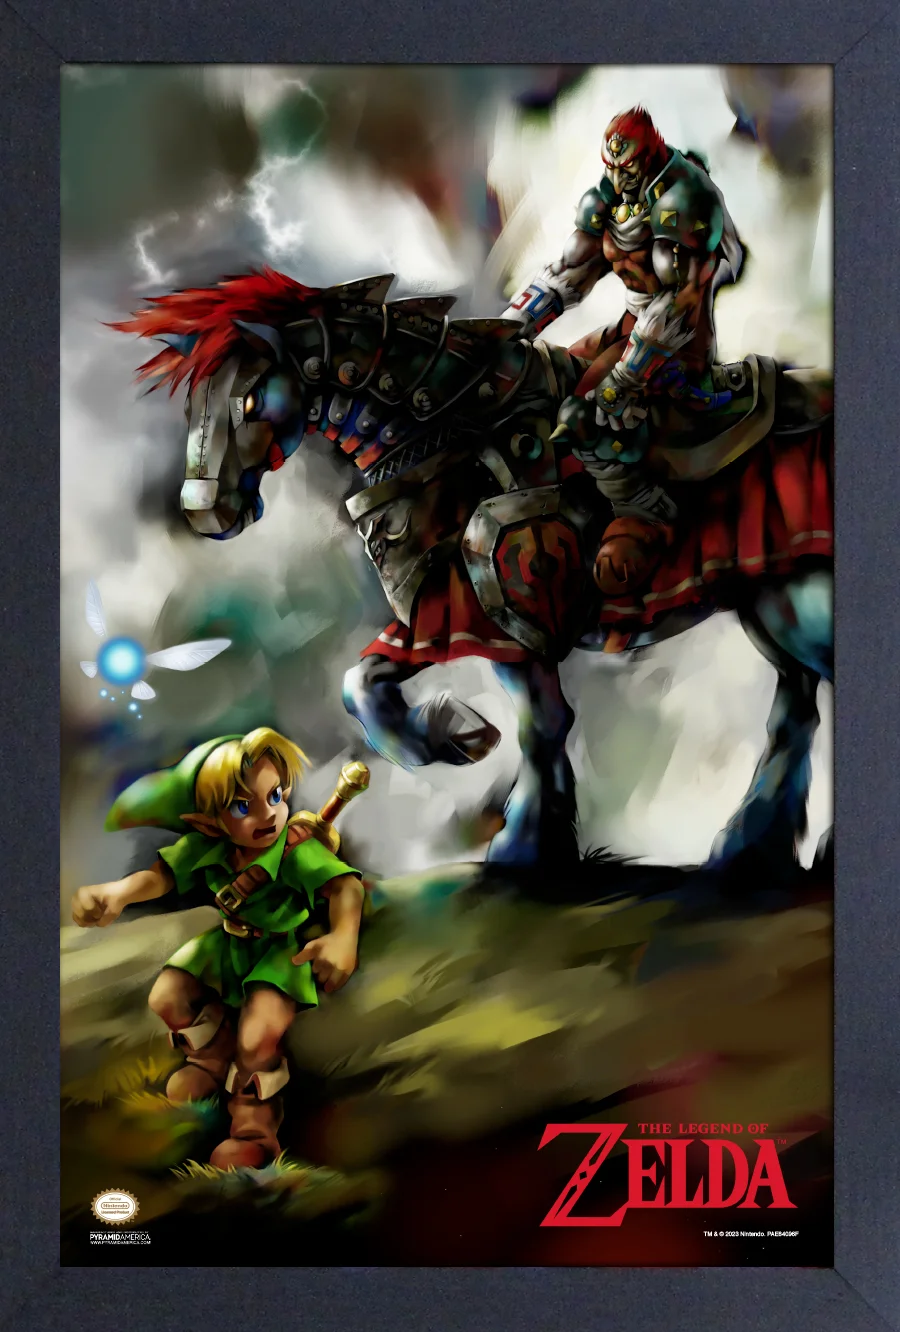 Zelda - Ocarina of Time - Young Link & Ganondorf (11"x17" Gel-Coat) (Order in multiples of 6, mix and match styles)